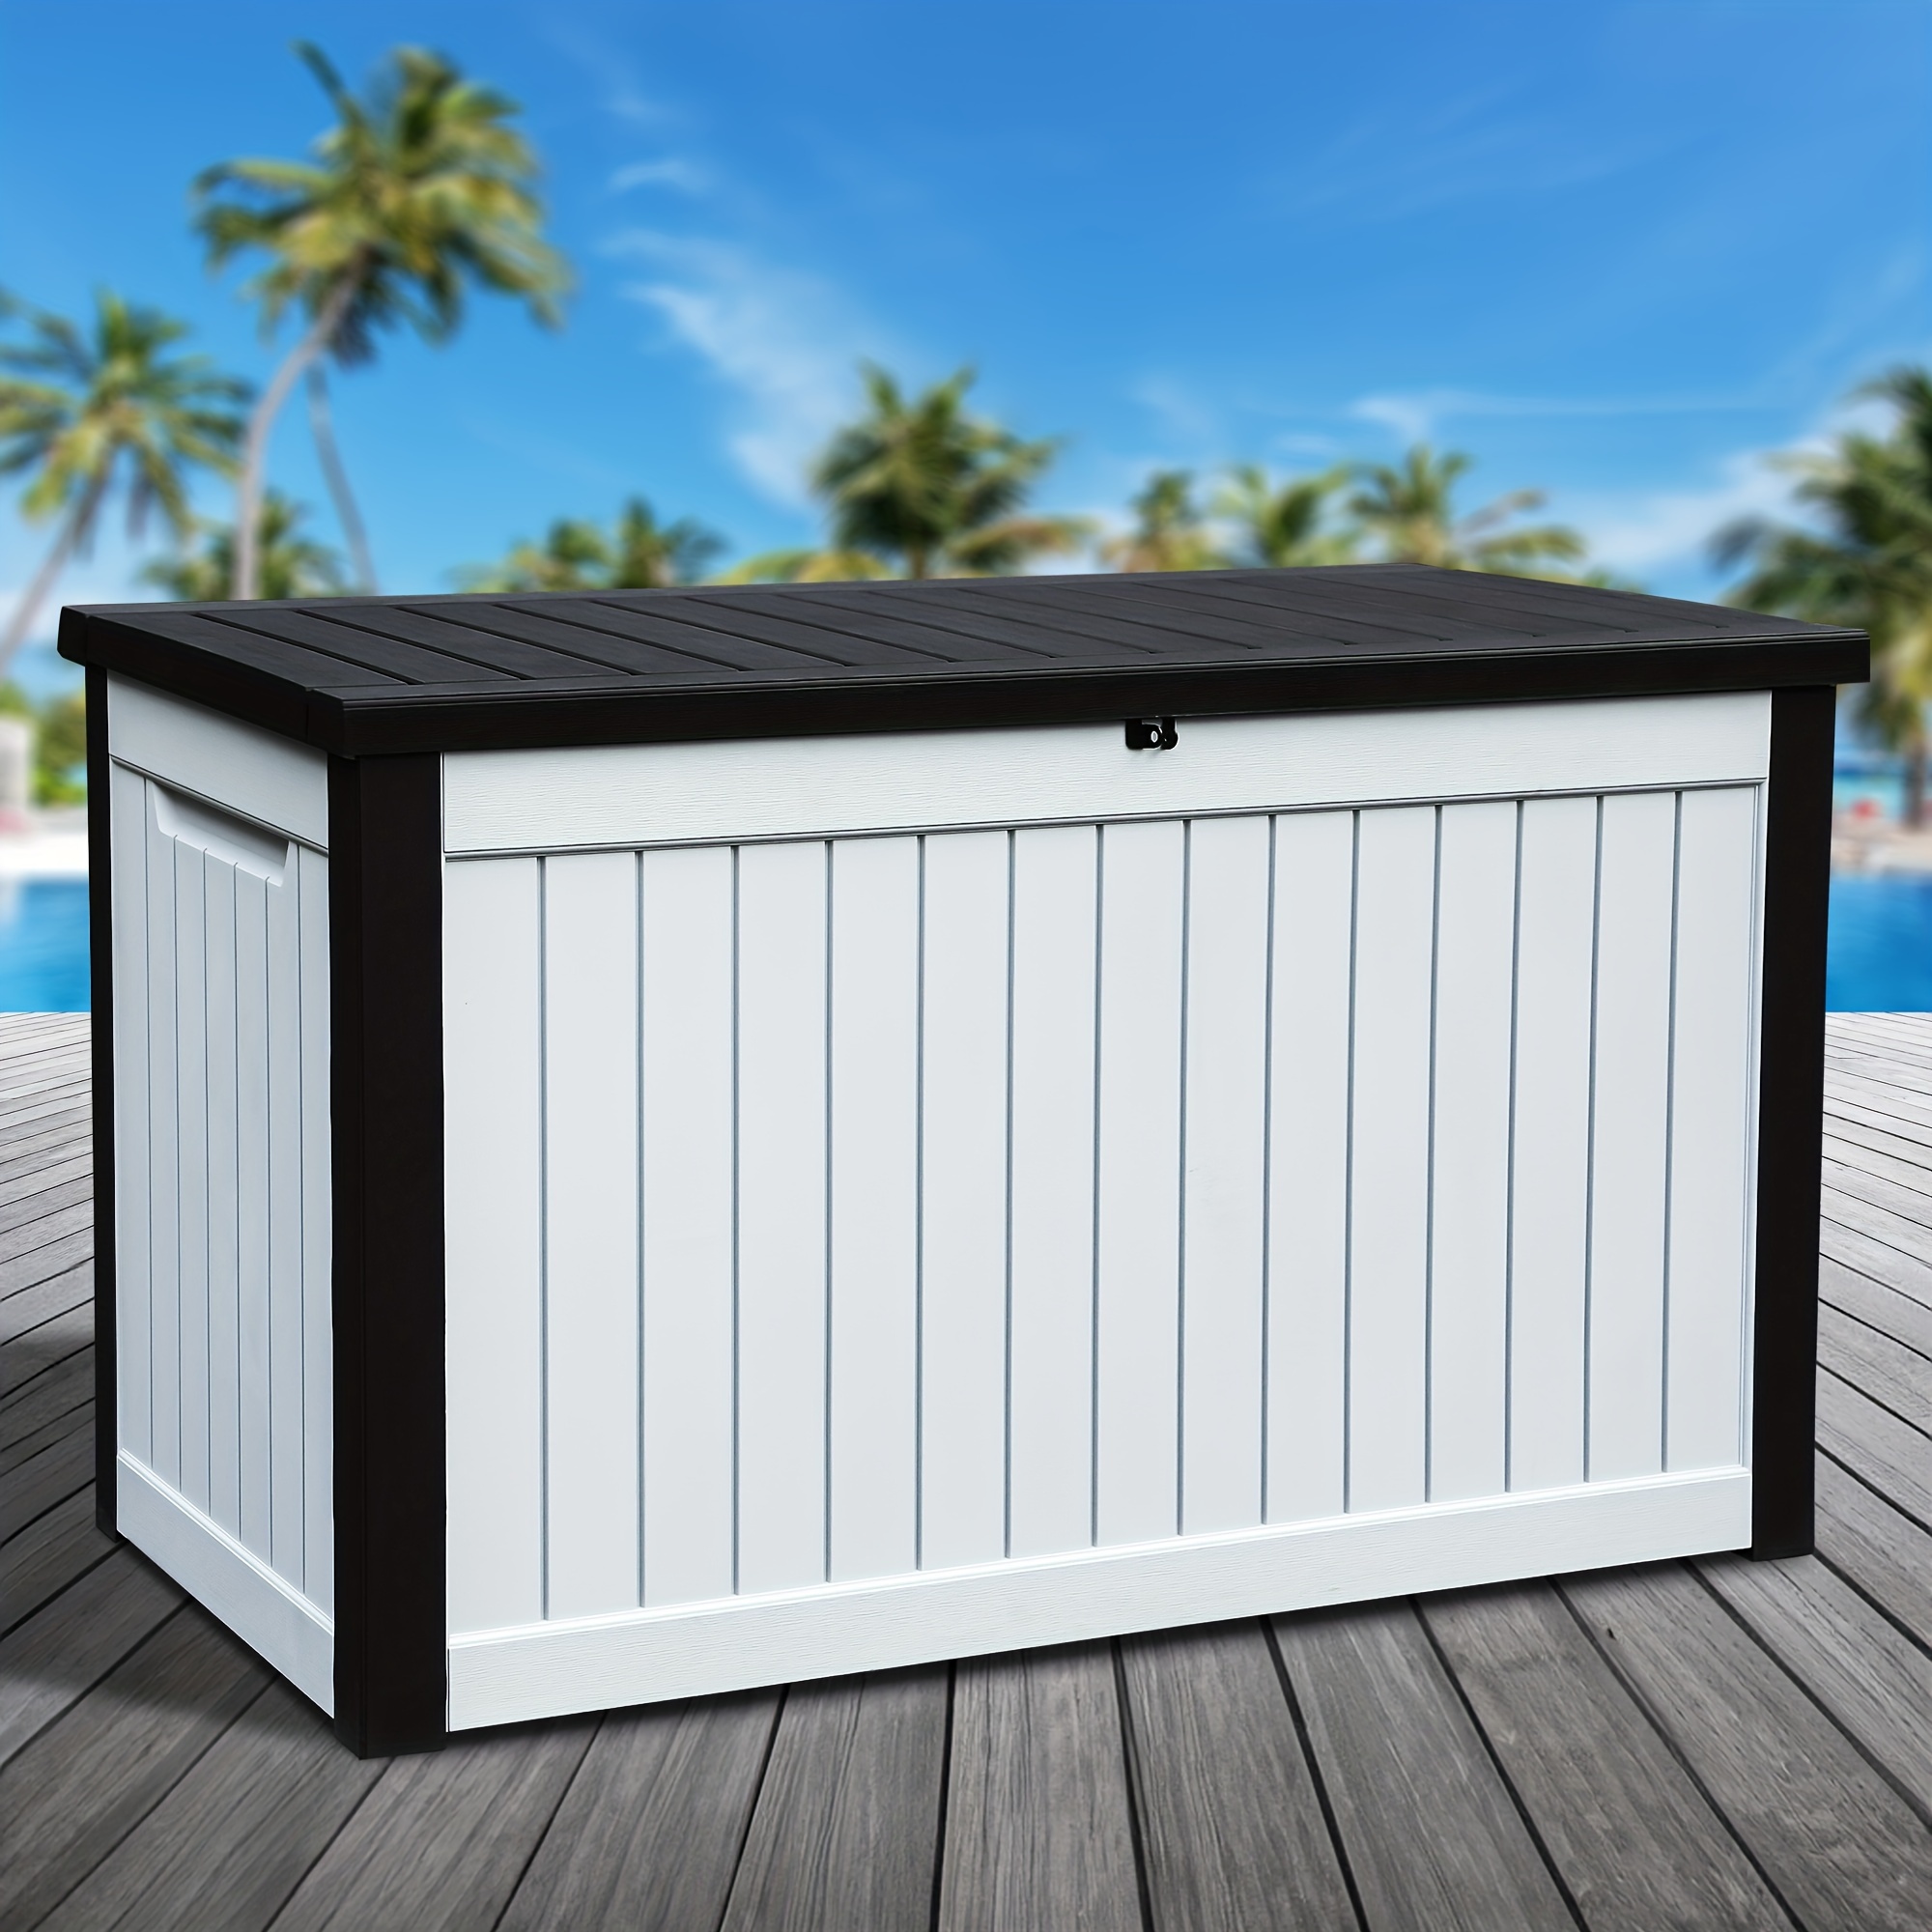 

Homiflex 230 Gallon Large Outdoor Storage Deck Box For Patio Furniture Outdoor Cushions, For Patio Furniture, Outdoor Cushions, Garden Tools & Sports/pools Equipment, Off-white